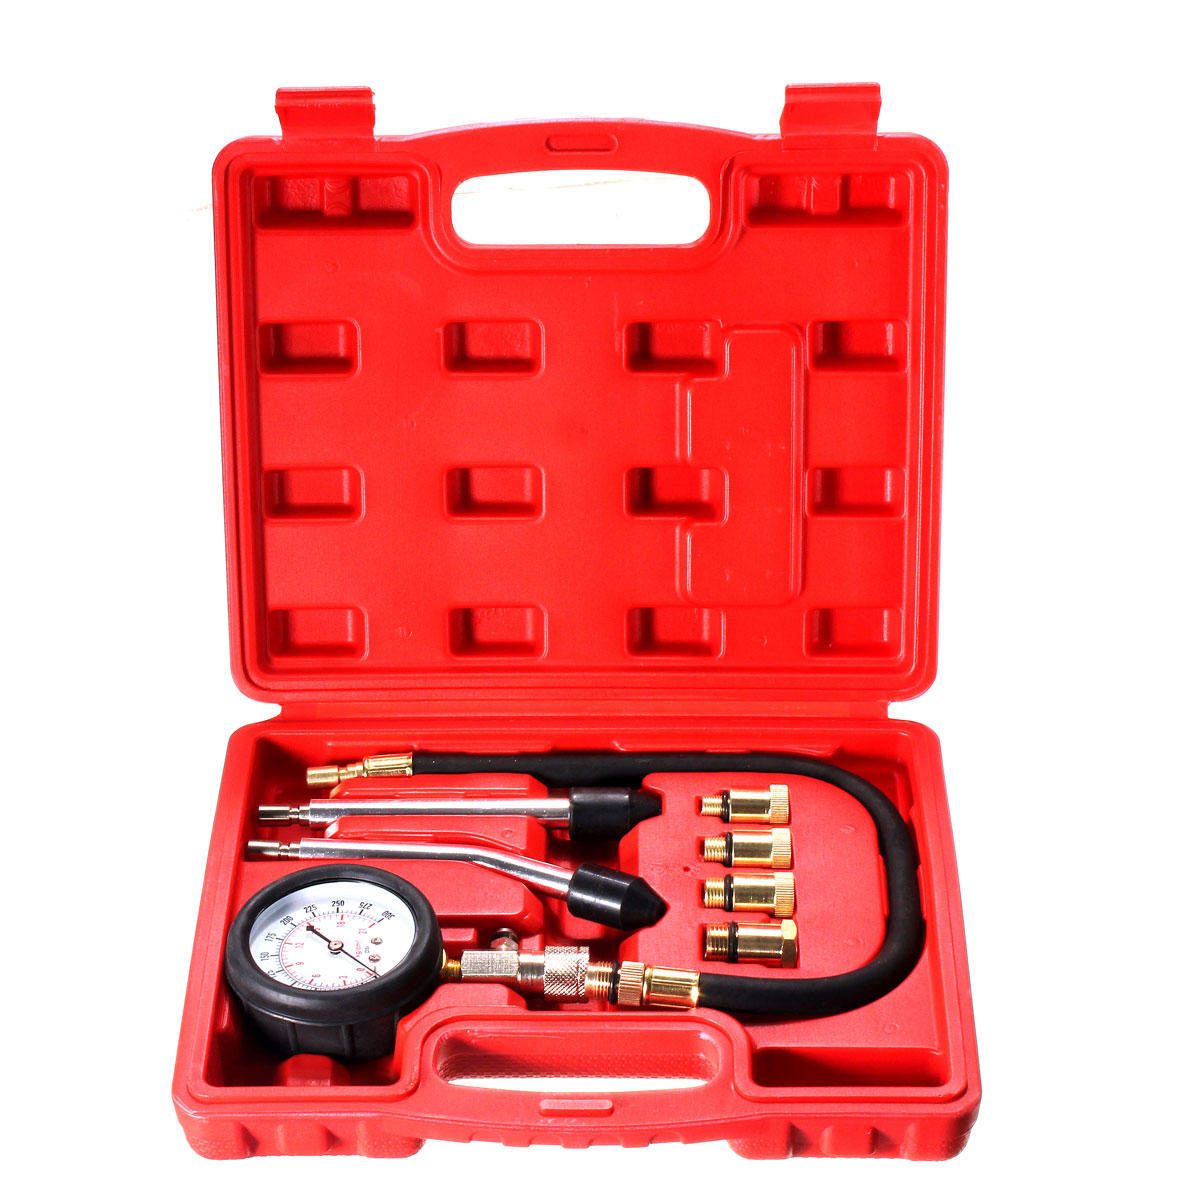 Car Motorcycle Petrol Engine Cylinder Compression Tester Tool Kits US Shipping 